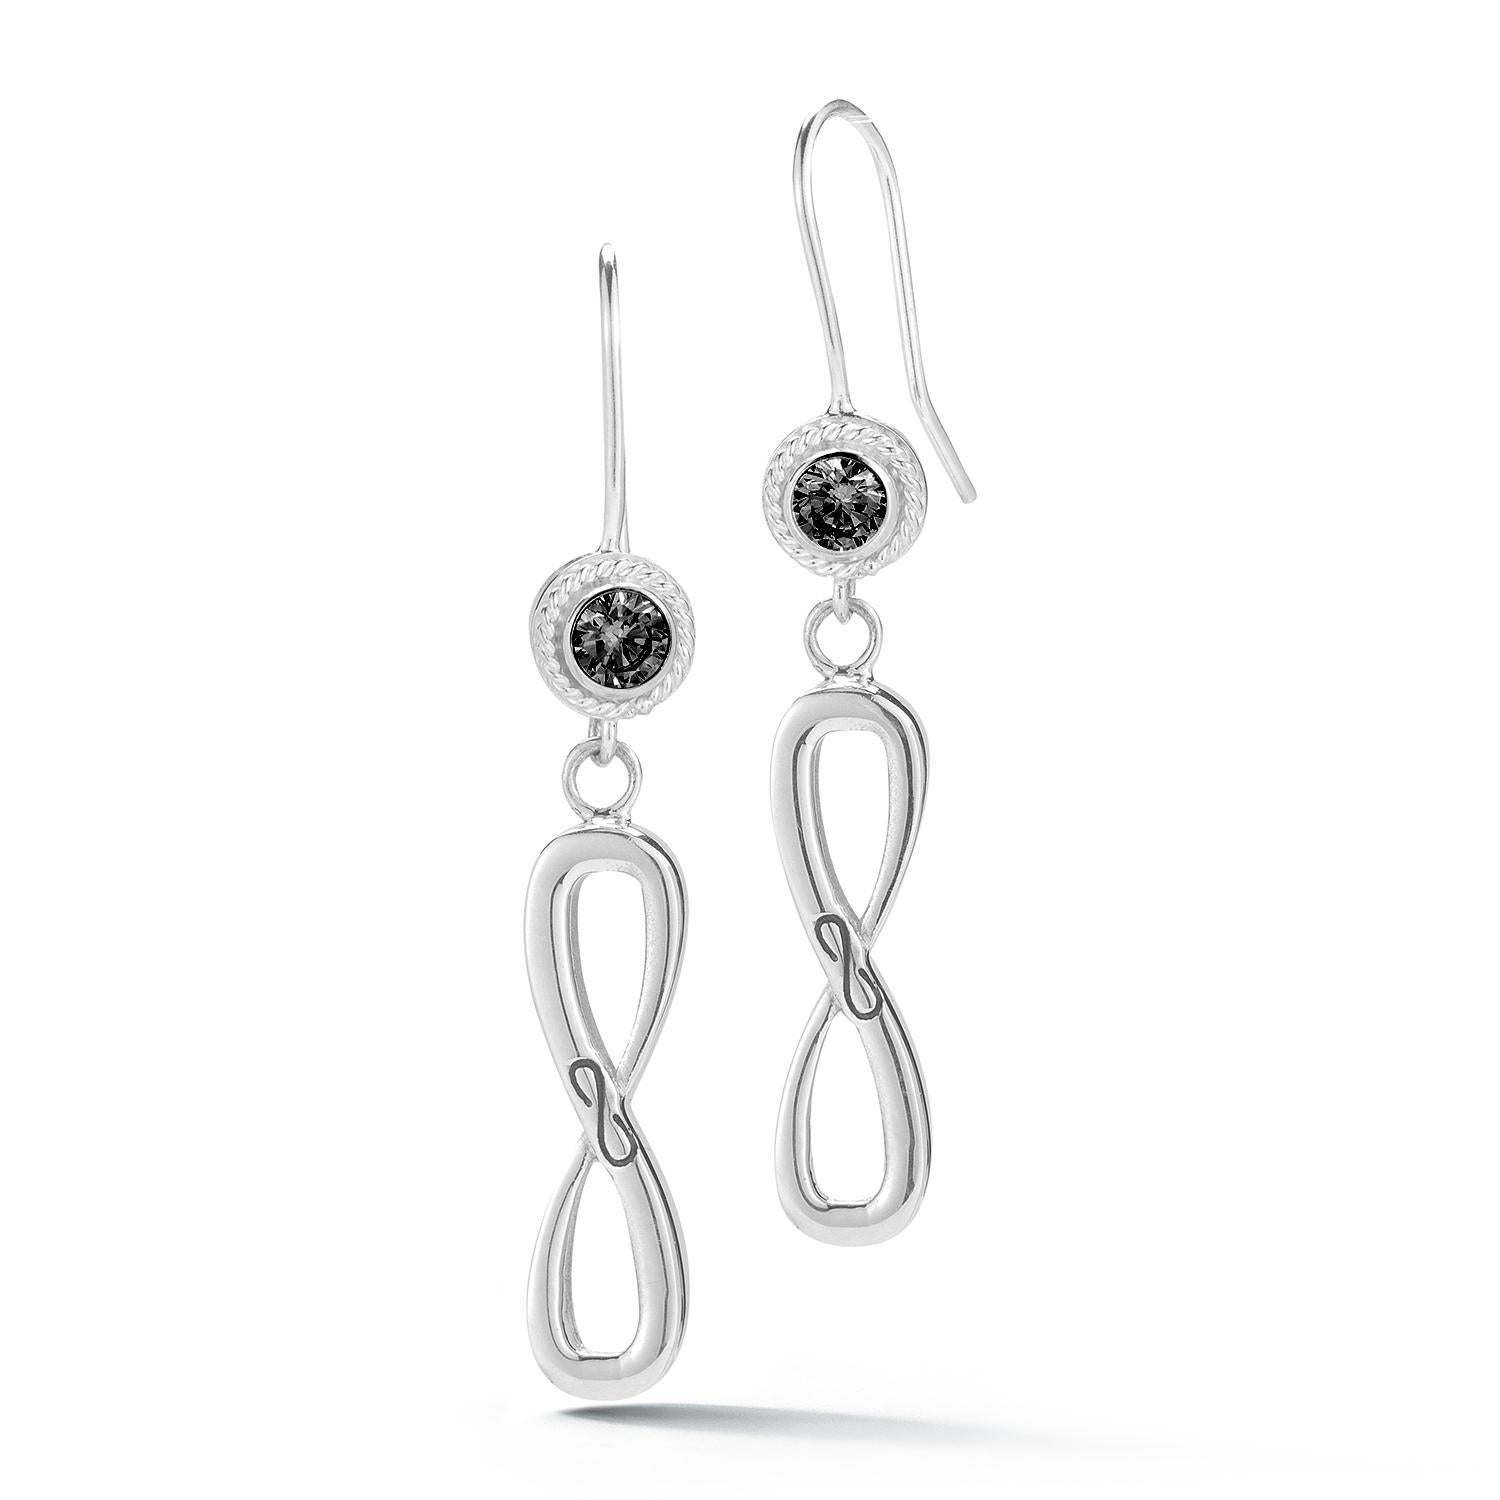 Designed in NYC

.925 Sterling Silver 2 x 7 mm Olive Peridot Infinity Stone Stud Wire Hook Earrings. When it comes to self-expression, the style possibilities are endless. Infinity stone stud wire hook earrings:

Sterling silver 
High-polish